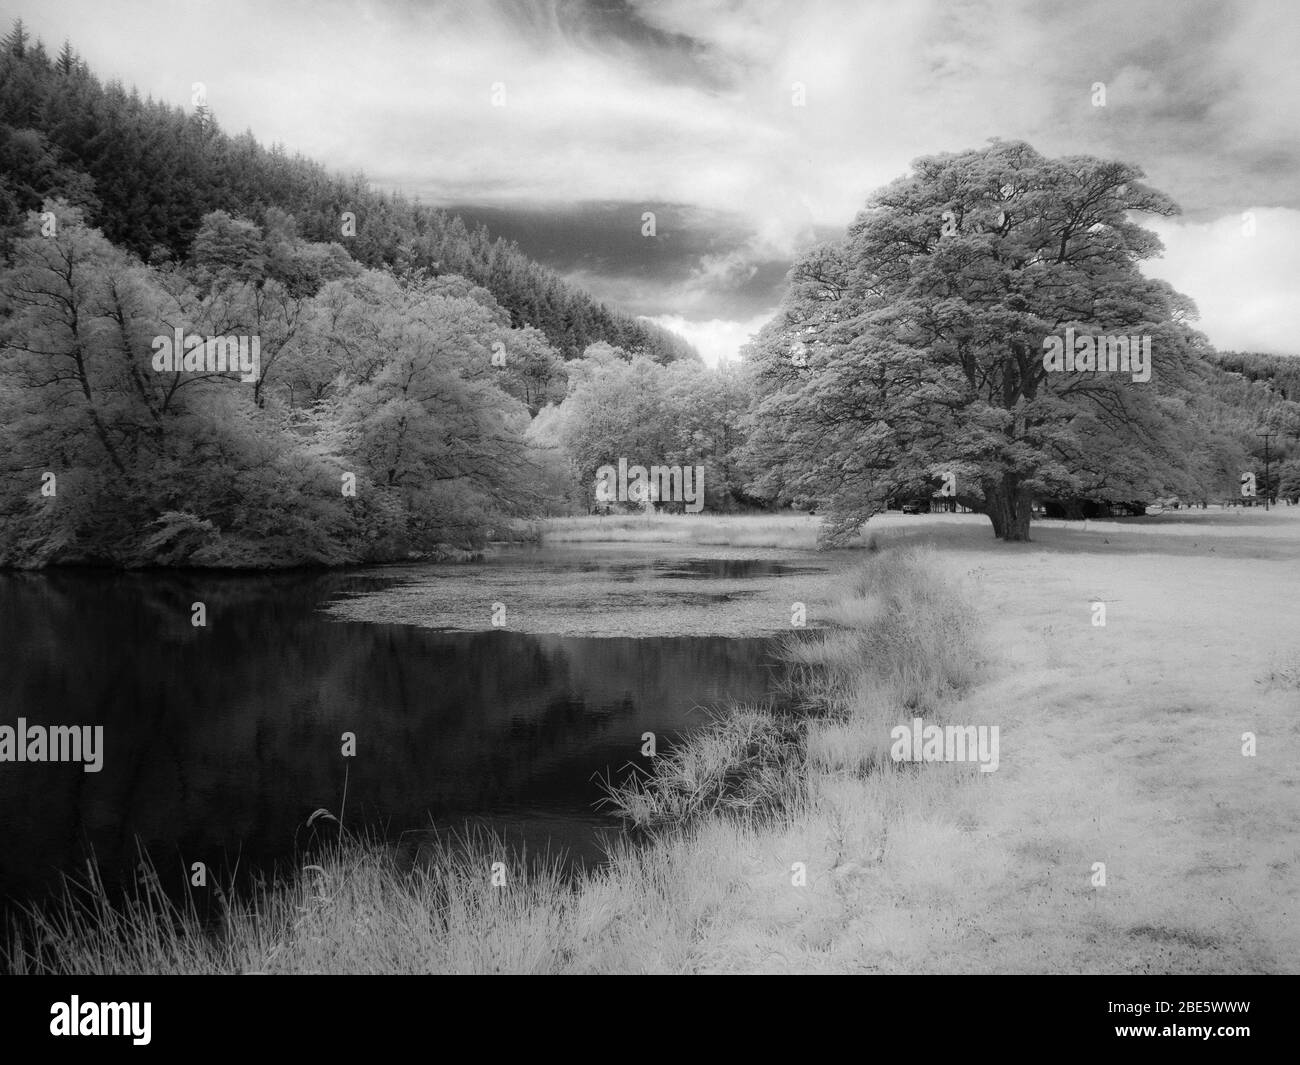 Infra-red image of a lake and trees Stock Photo